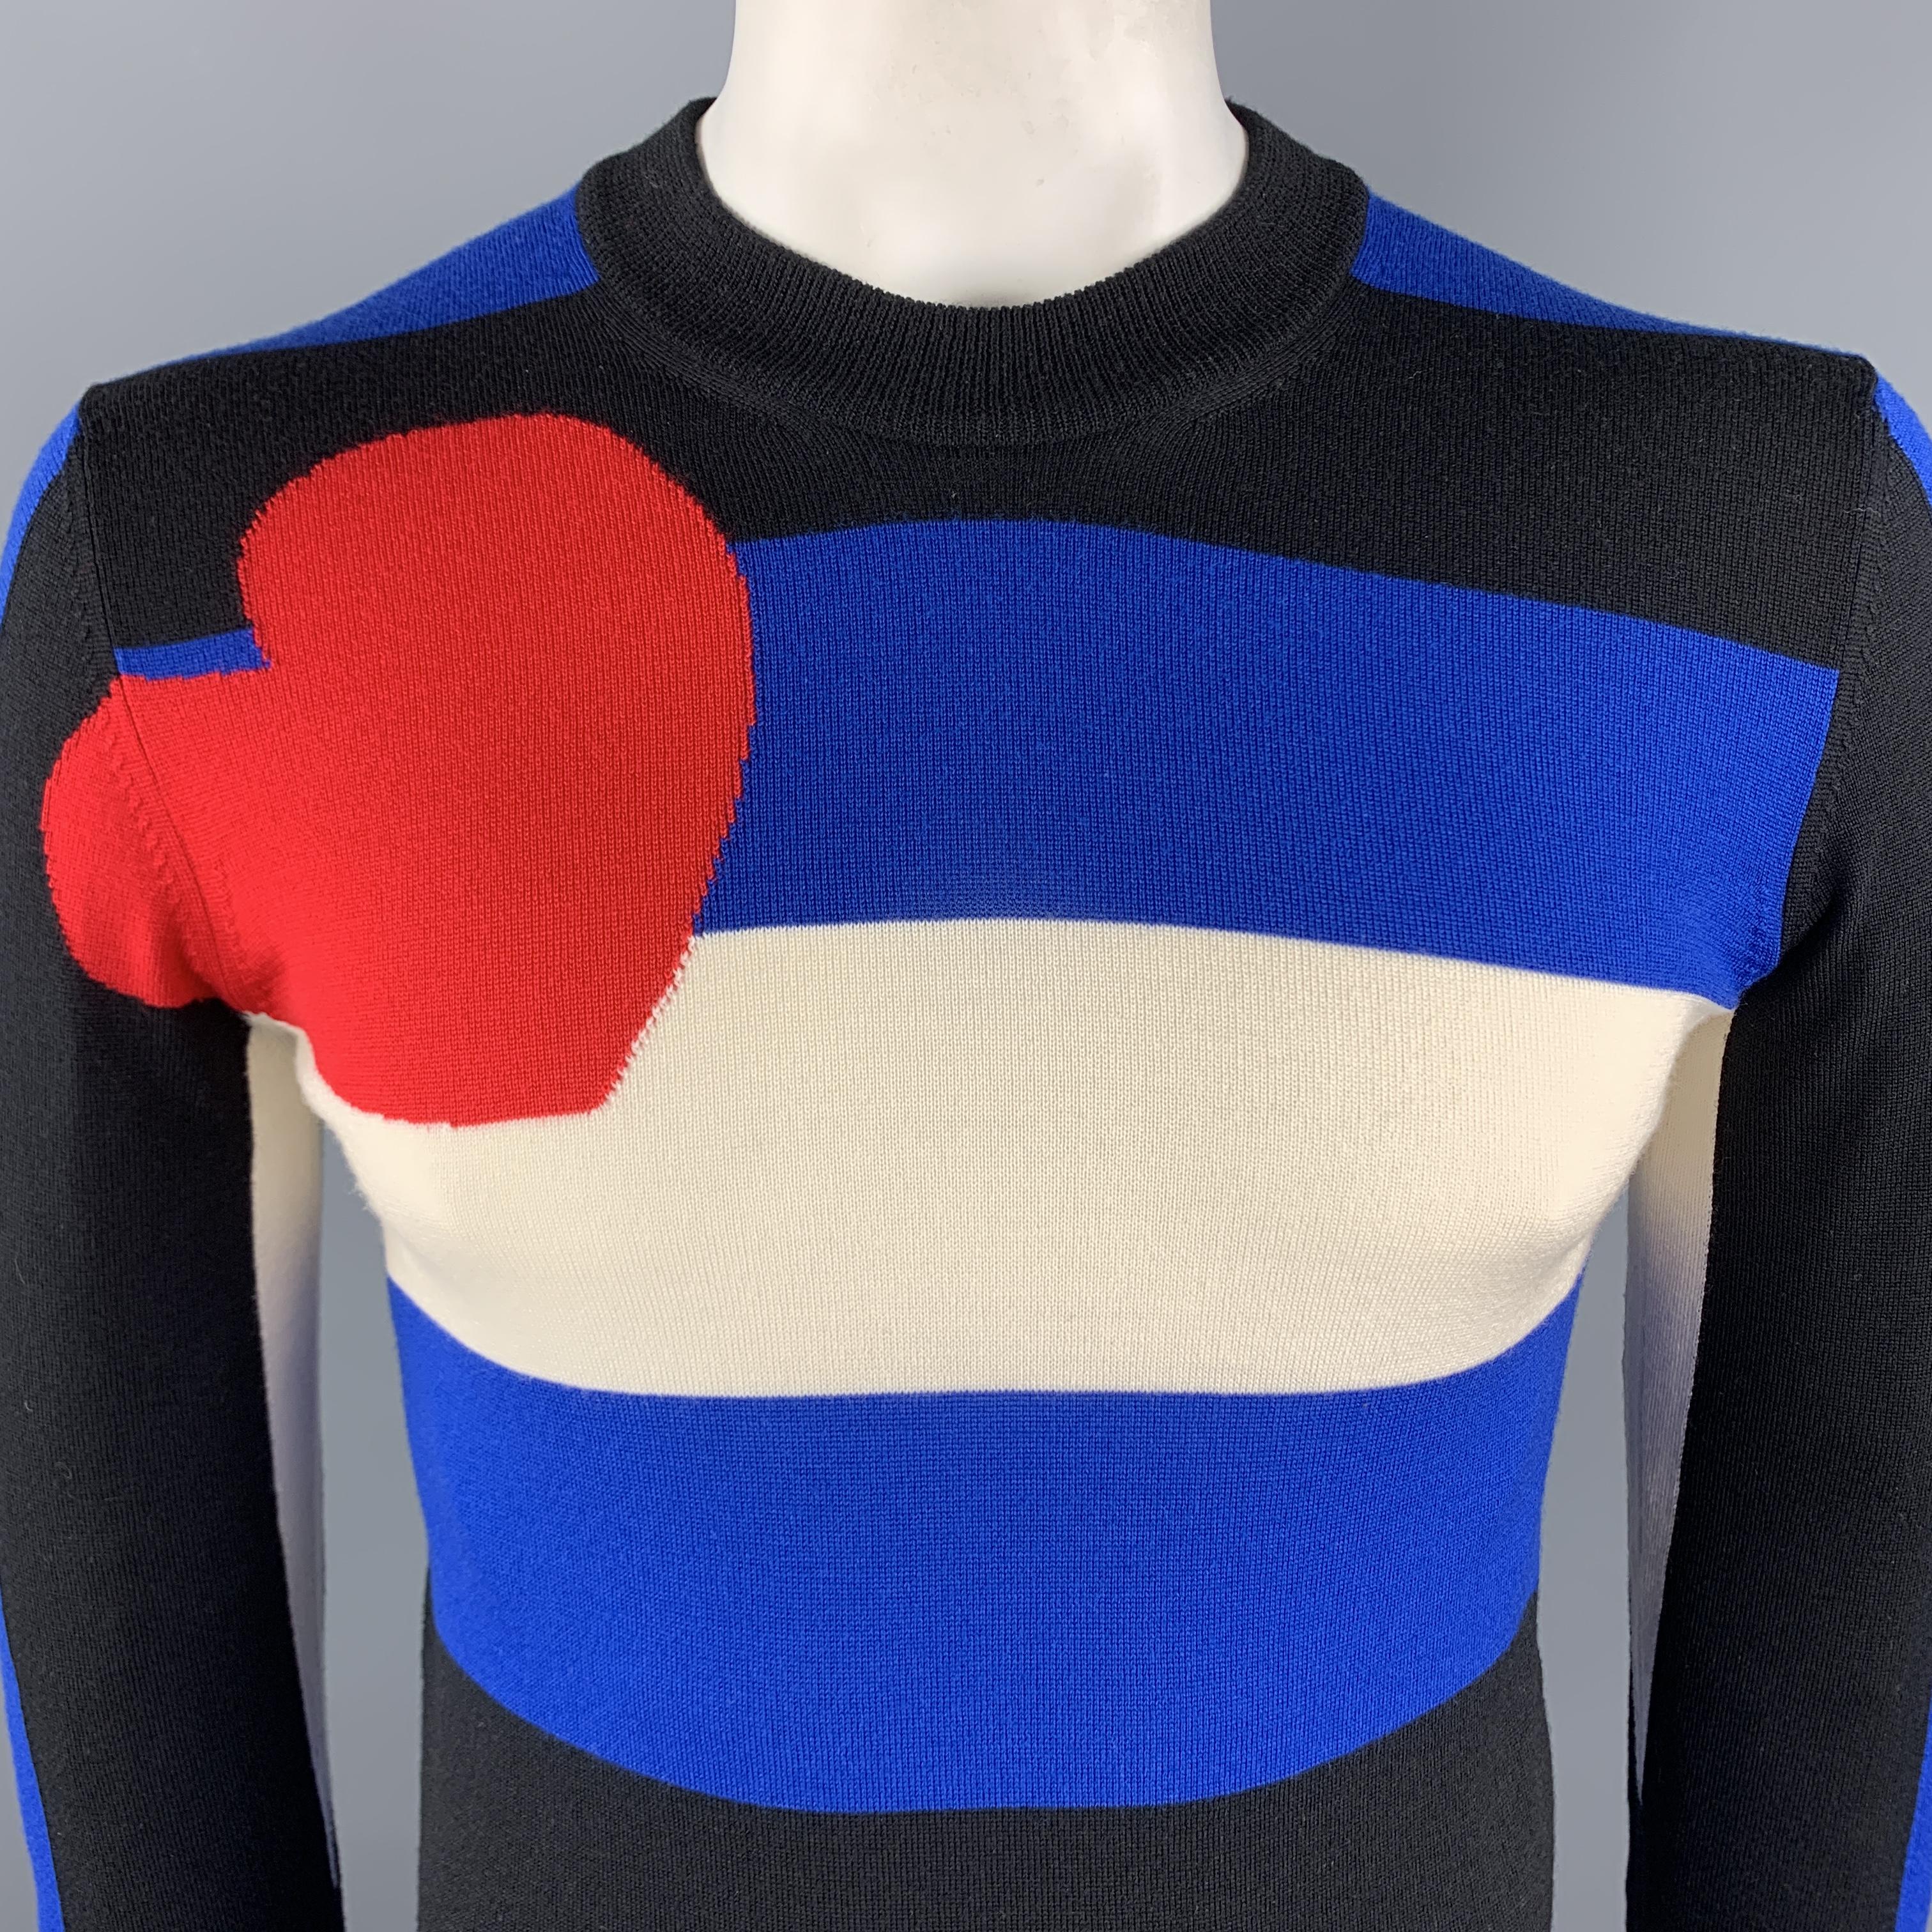 COMME des GARCONS x VETEMENTS Spring 17 Leather Pride Flag Pullover Sweater comes in blue and black wool striped material, with a crewneck, a woven red heart, and ribbed cuffs and hem. Made in Japan. 

Excelent Pre-Owned Condition.
Marked: